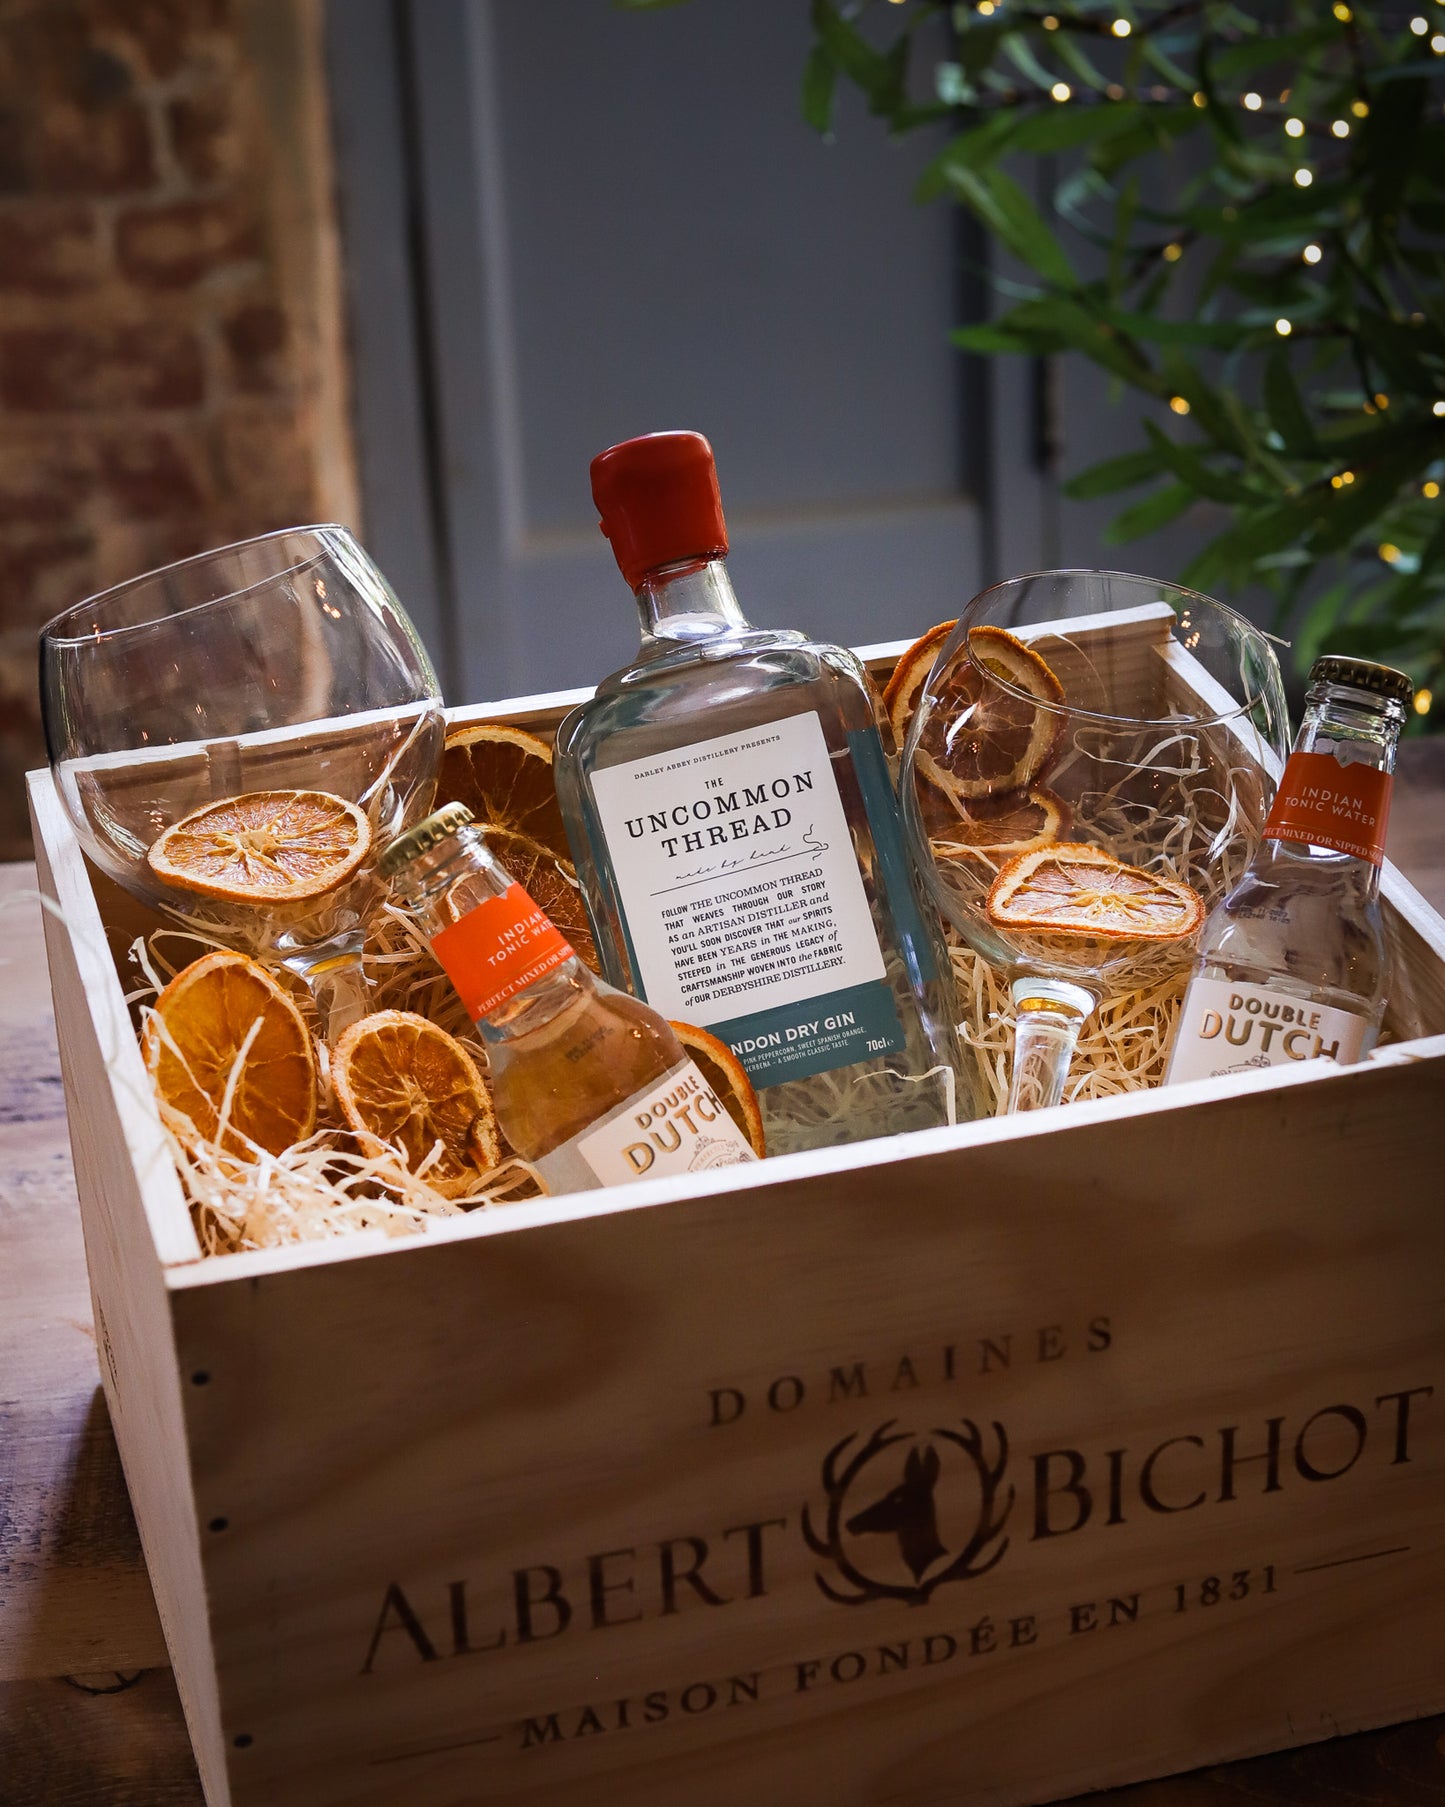 Limited edition gin gift set presented in a vintage wine box